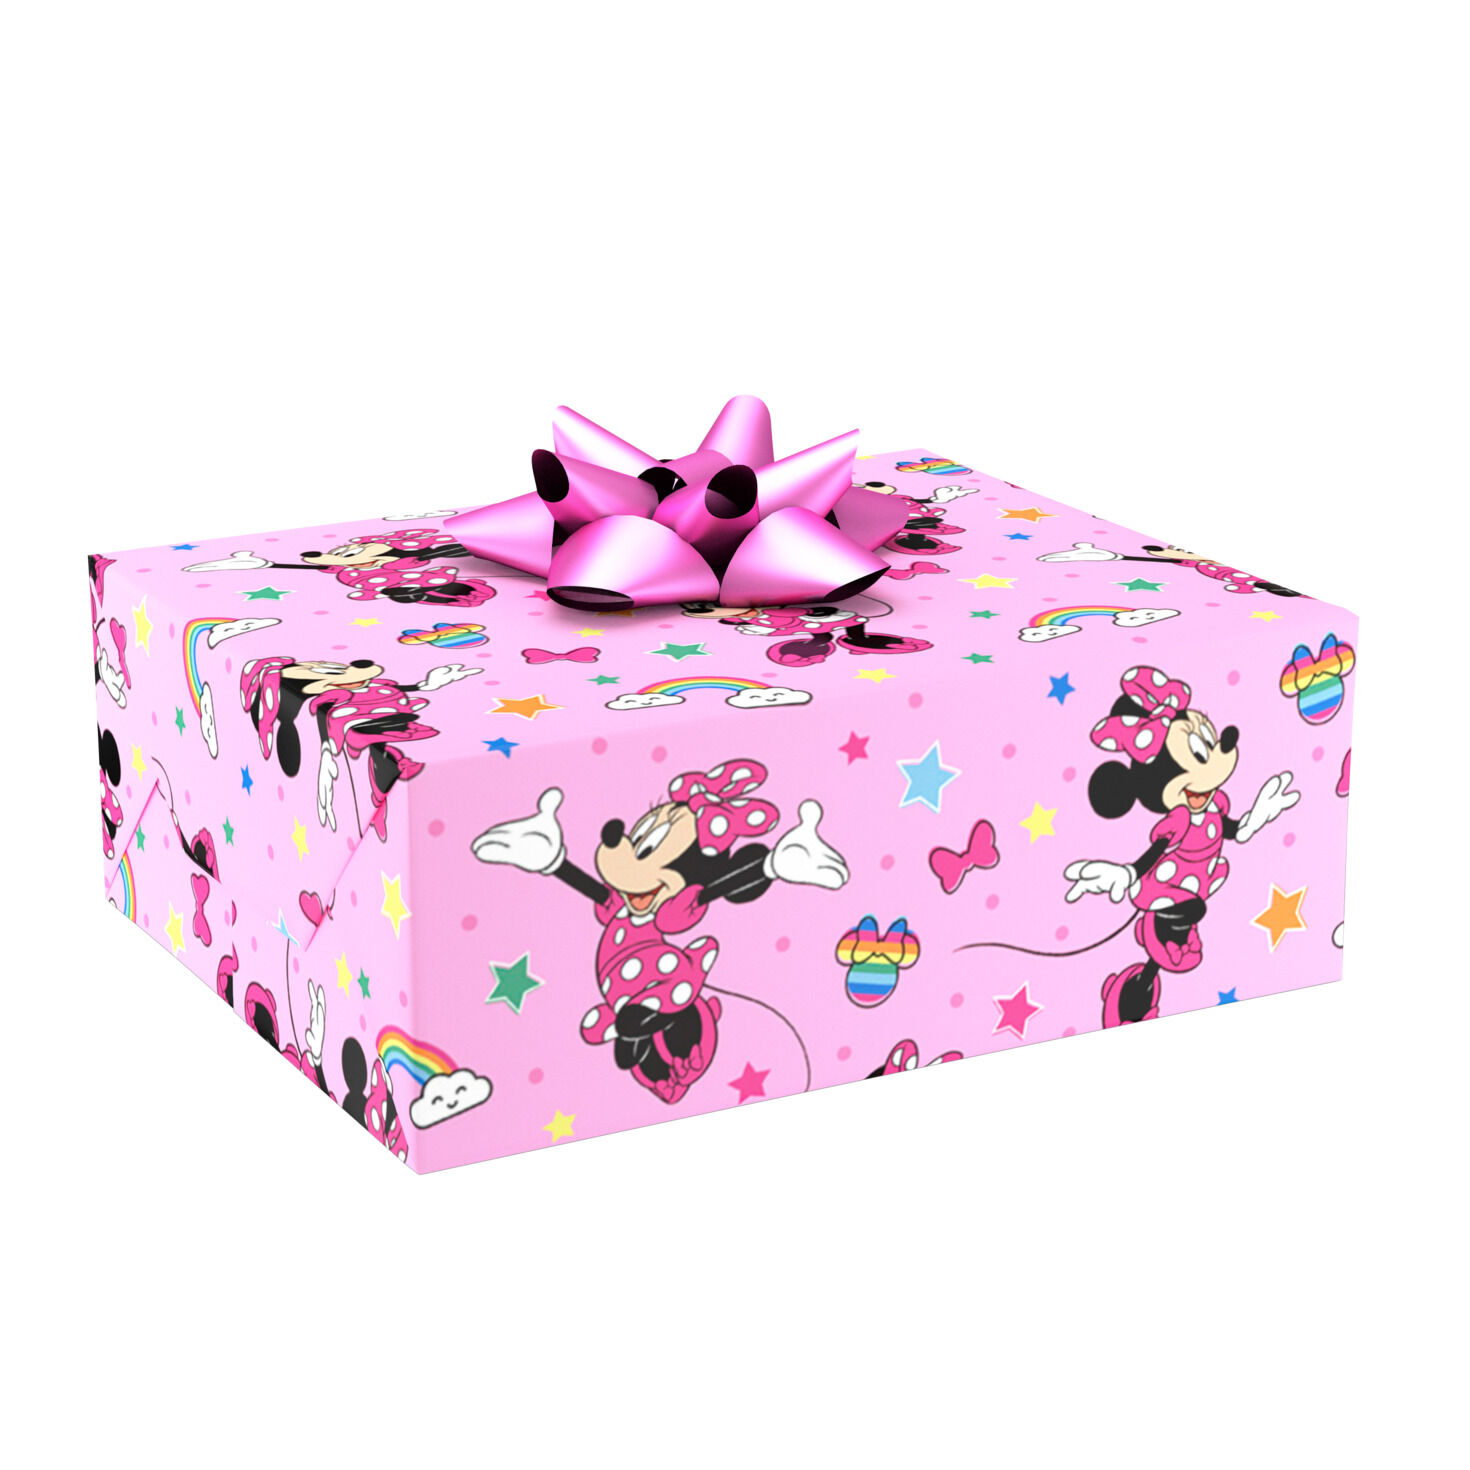 GIFTS LOOK LIKE MINNIE MOUSE DISNEY PARKS MINNIE MOUSE CHARACTER GIFT WRAP SET 